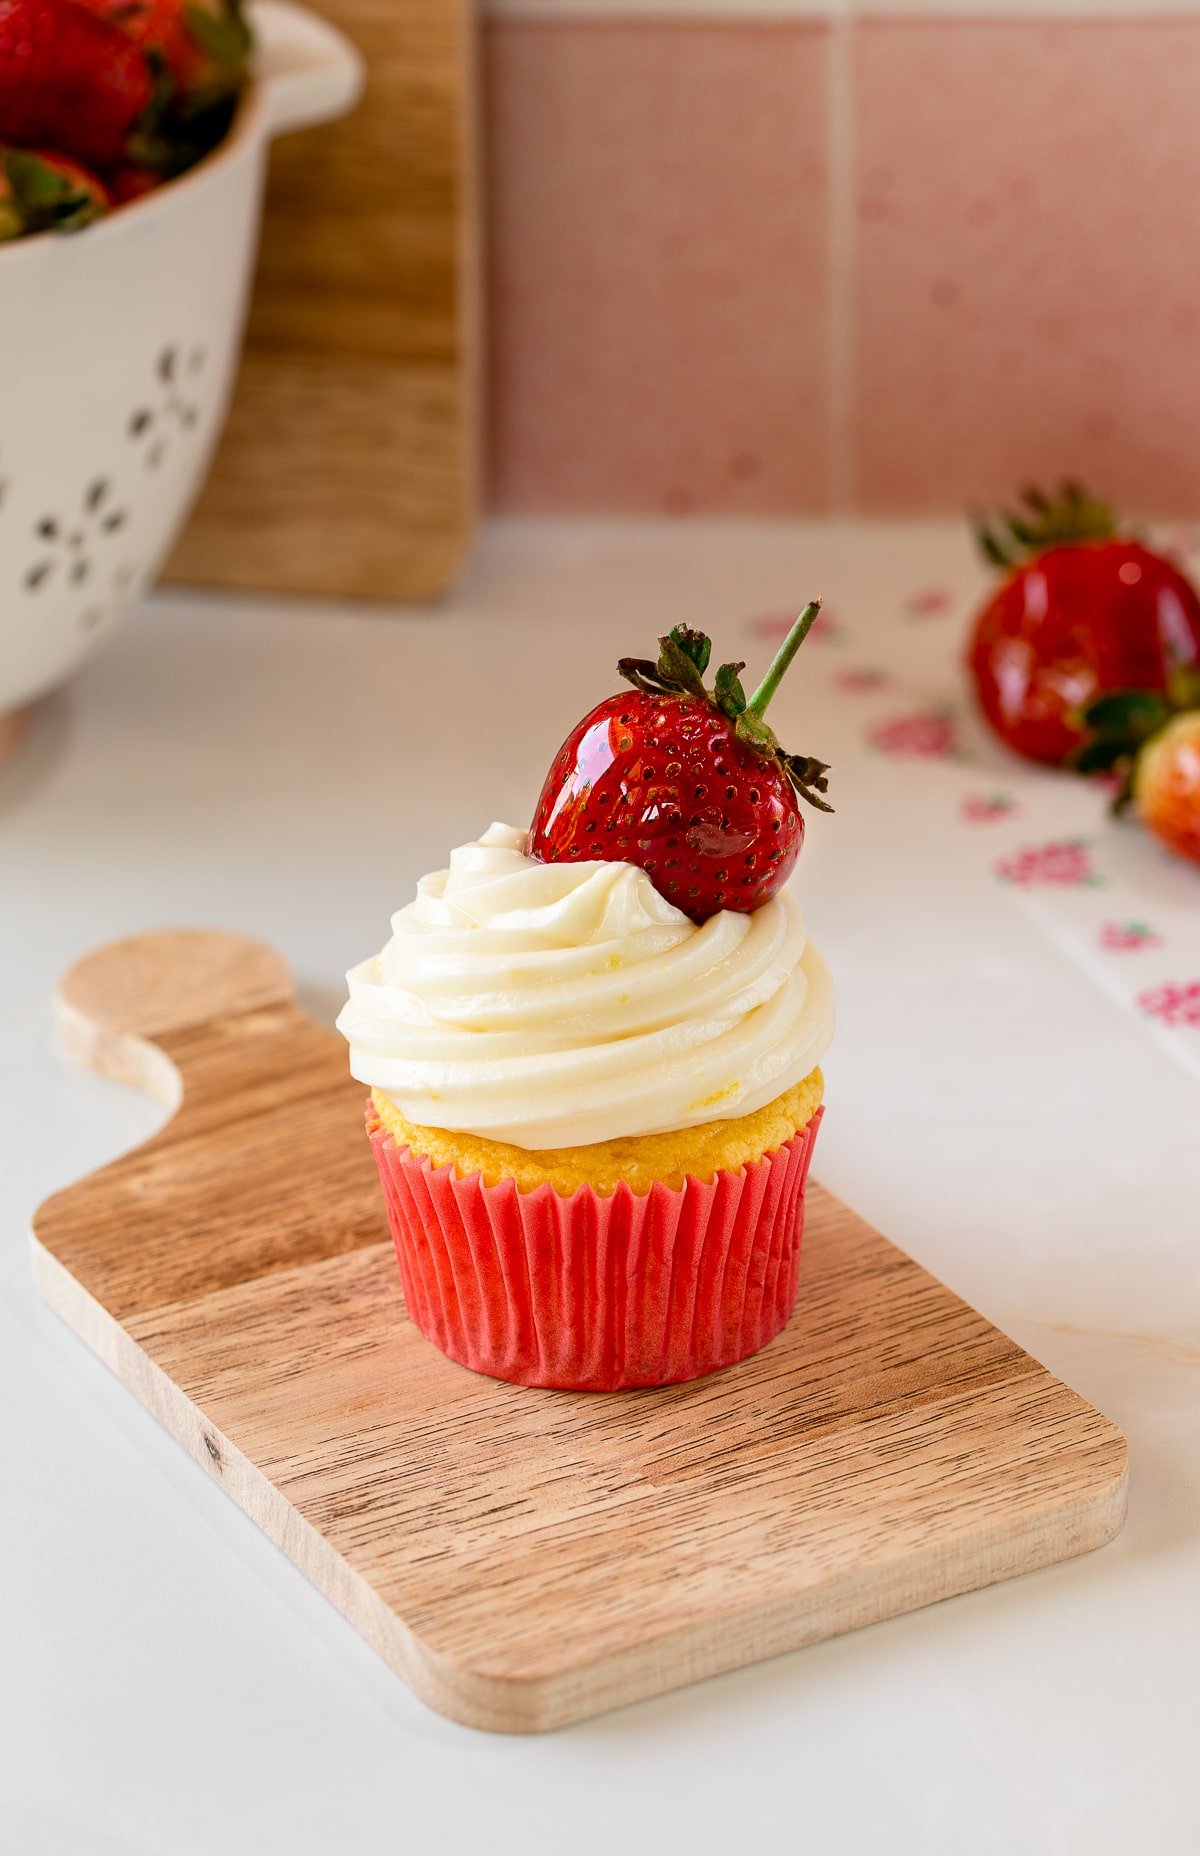 candied strawberry on cupcake